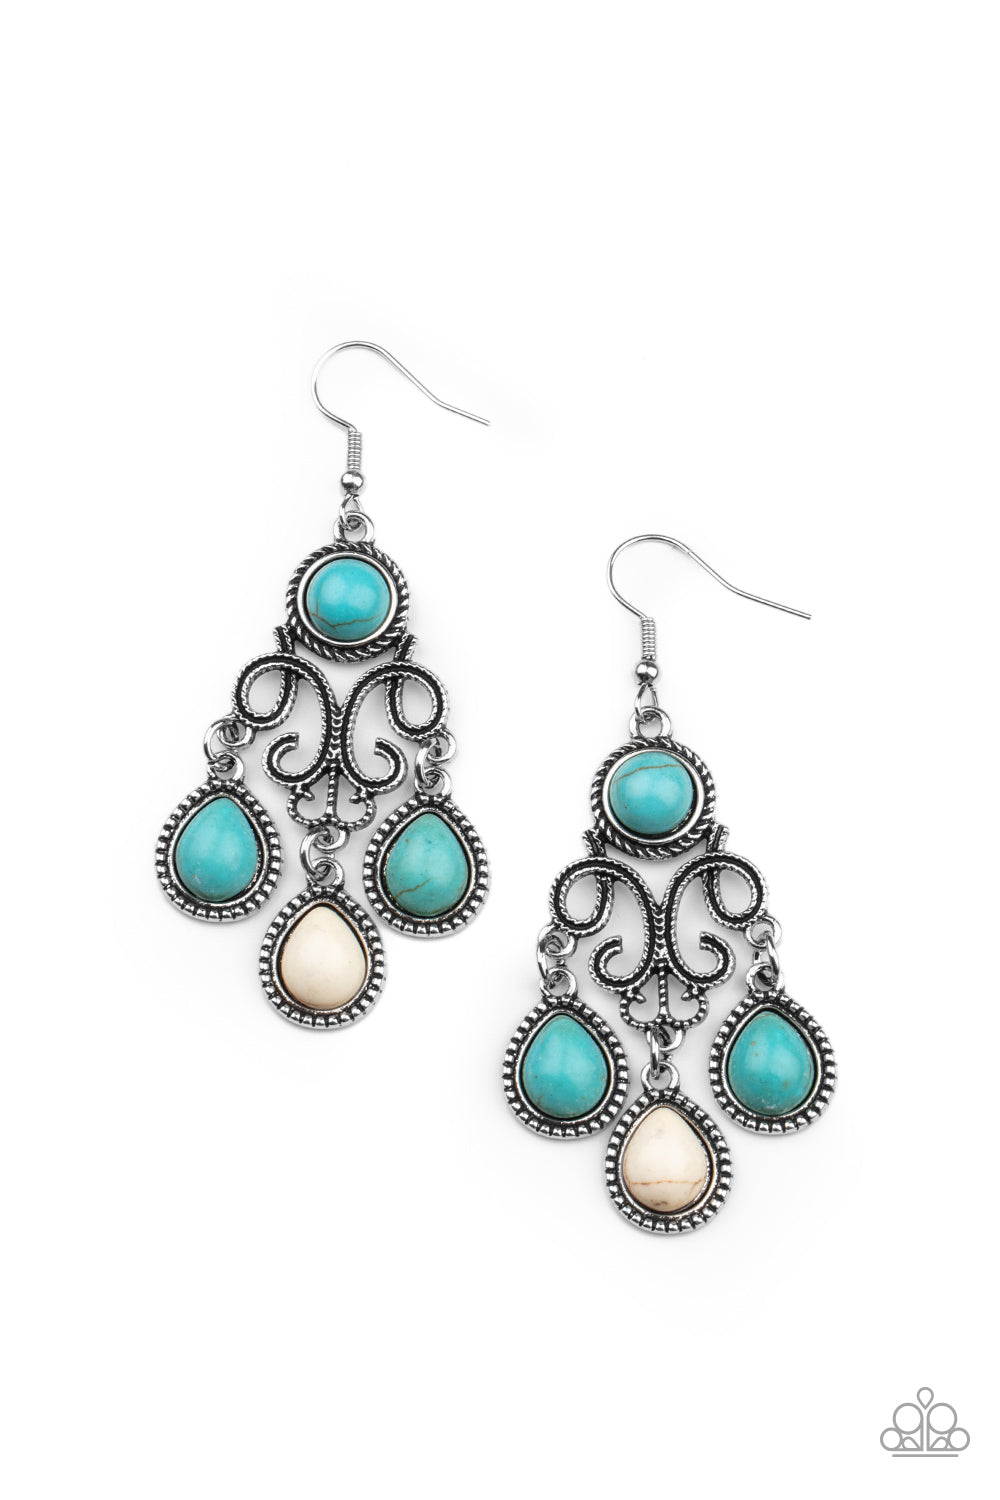 Refreshing turquoise and white stone dotted frames swing from the bottom of a filigree filled chandelier dotted with a matching turquoise stone, creating an earthy fringe. Earring attaches to a standard fishhook fitting.